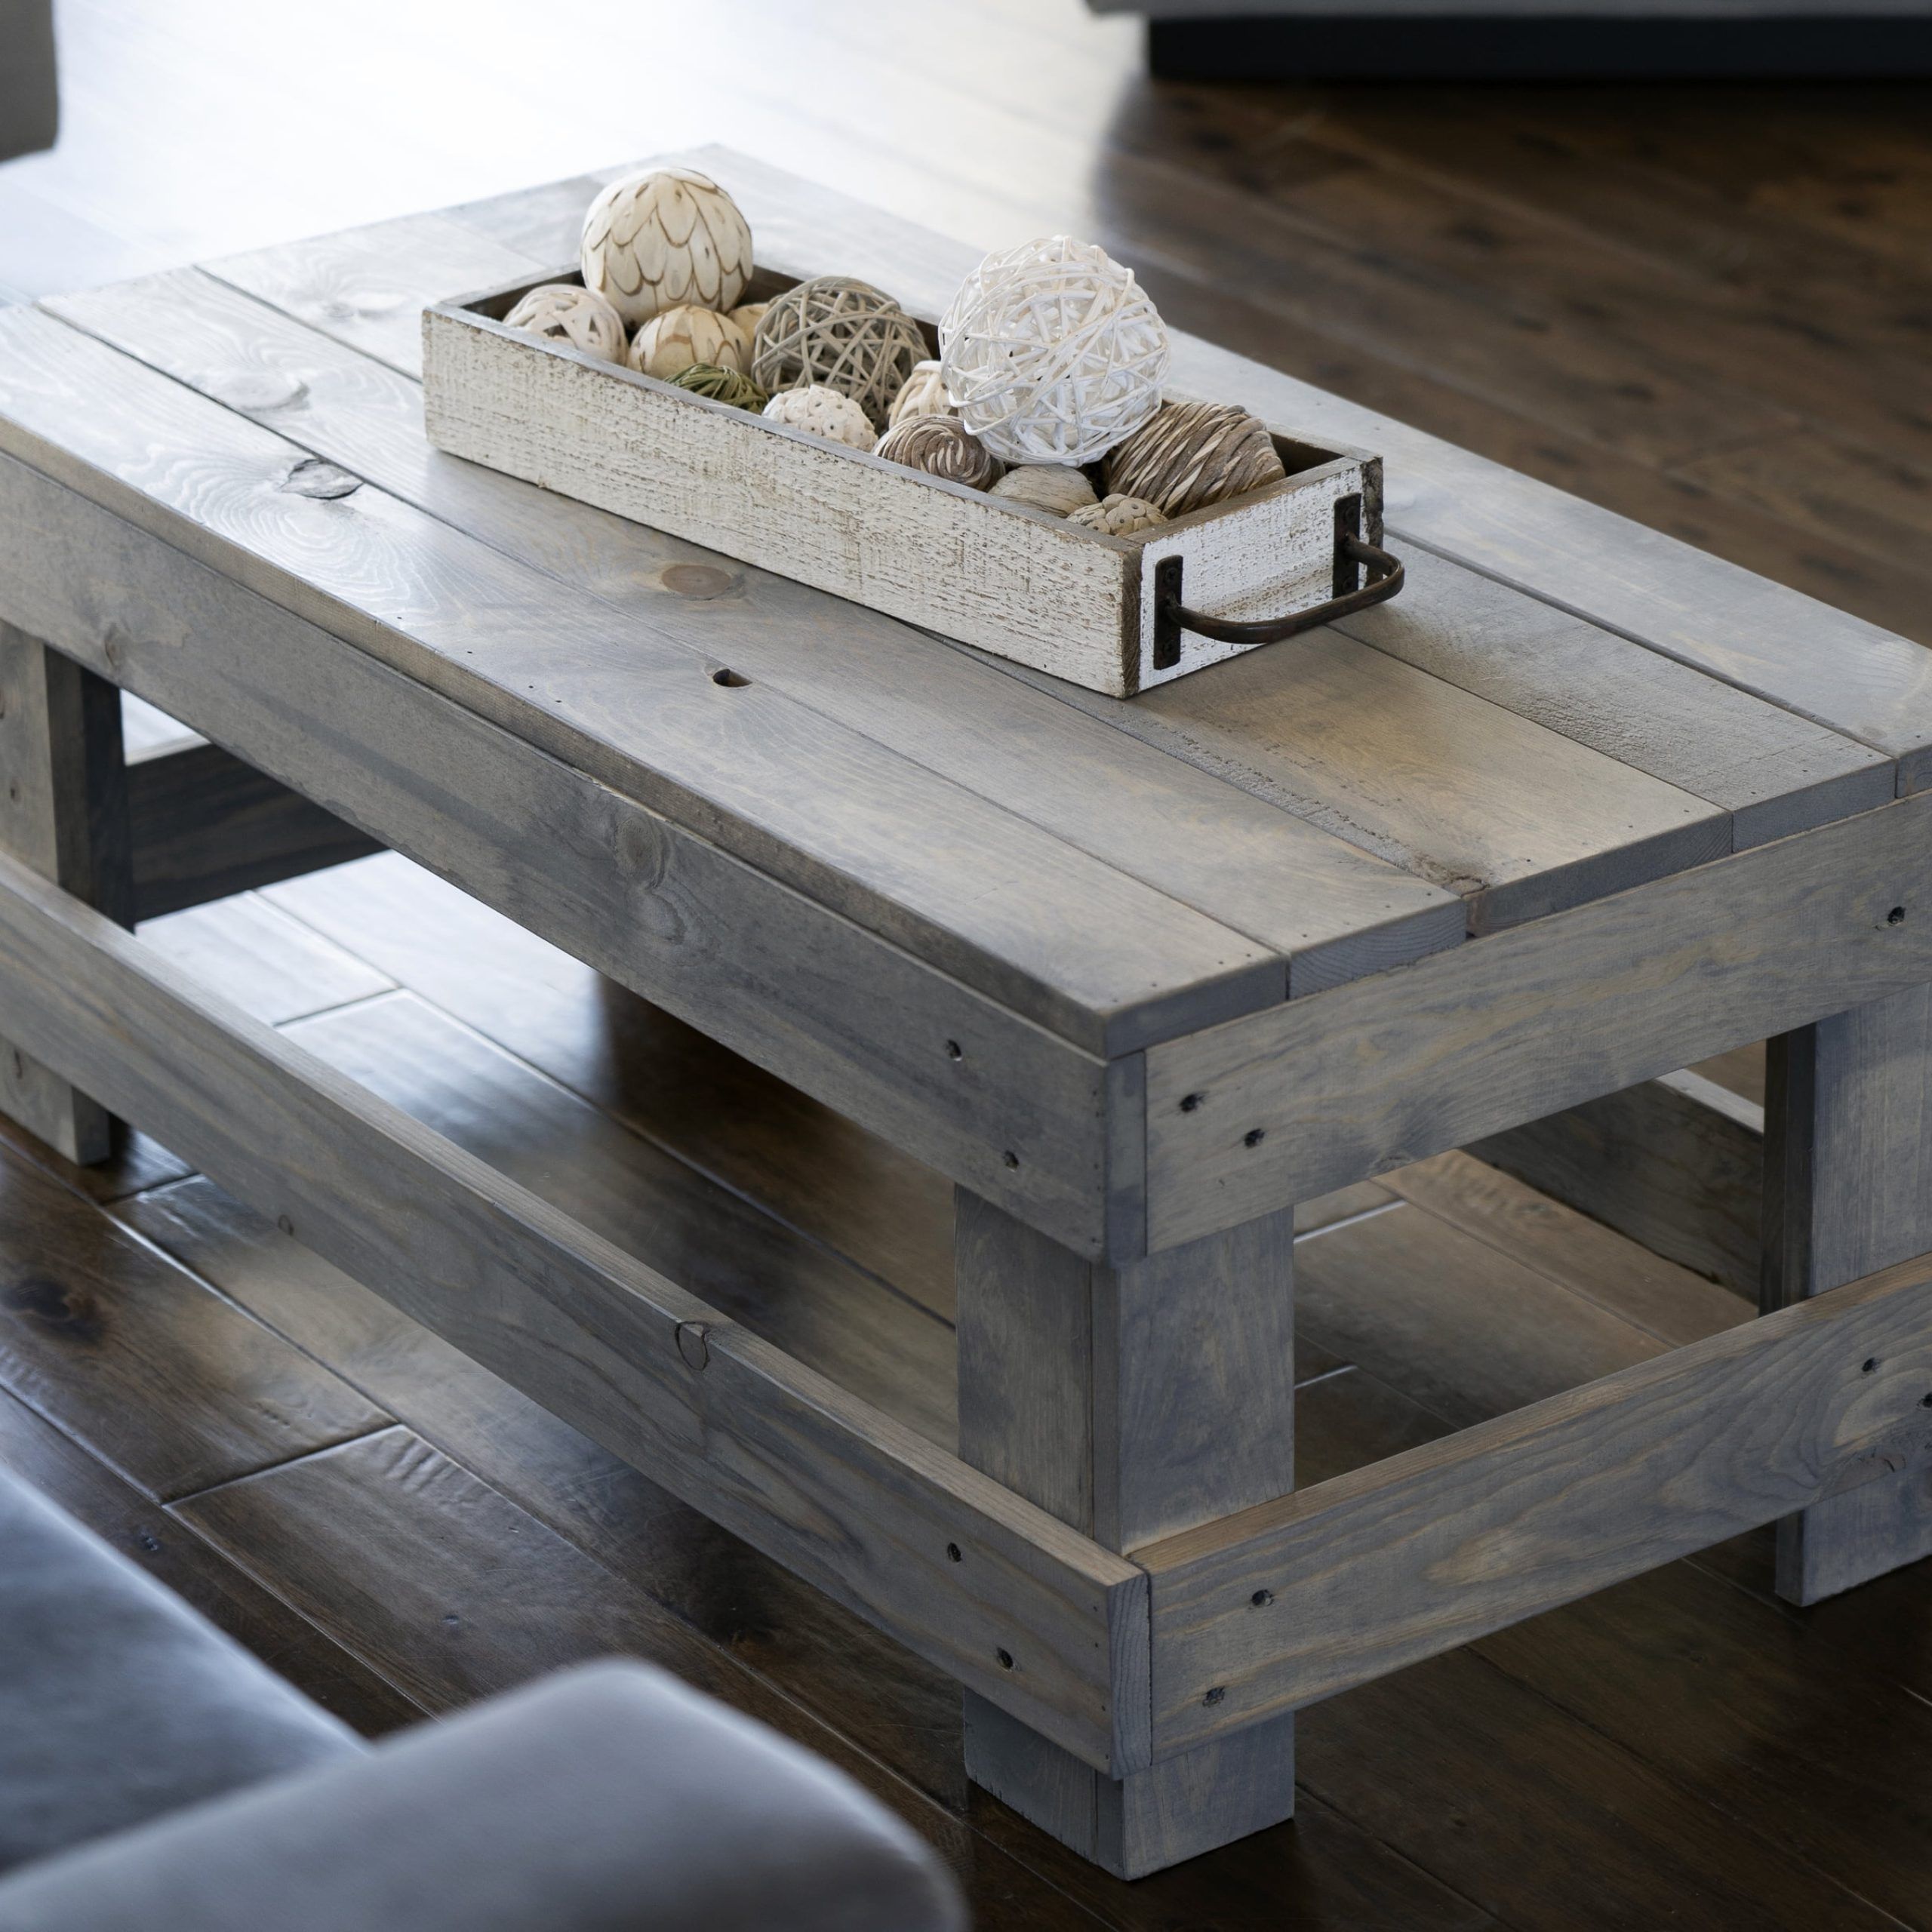 Woven Paths Coffee Tables In Current Buy Woven Paths Landmark Pine Solid Wood Farmhouse Coffee Table, Gray (View 8 of 15)